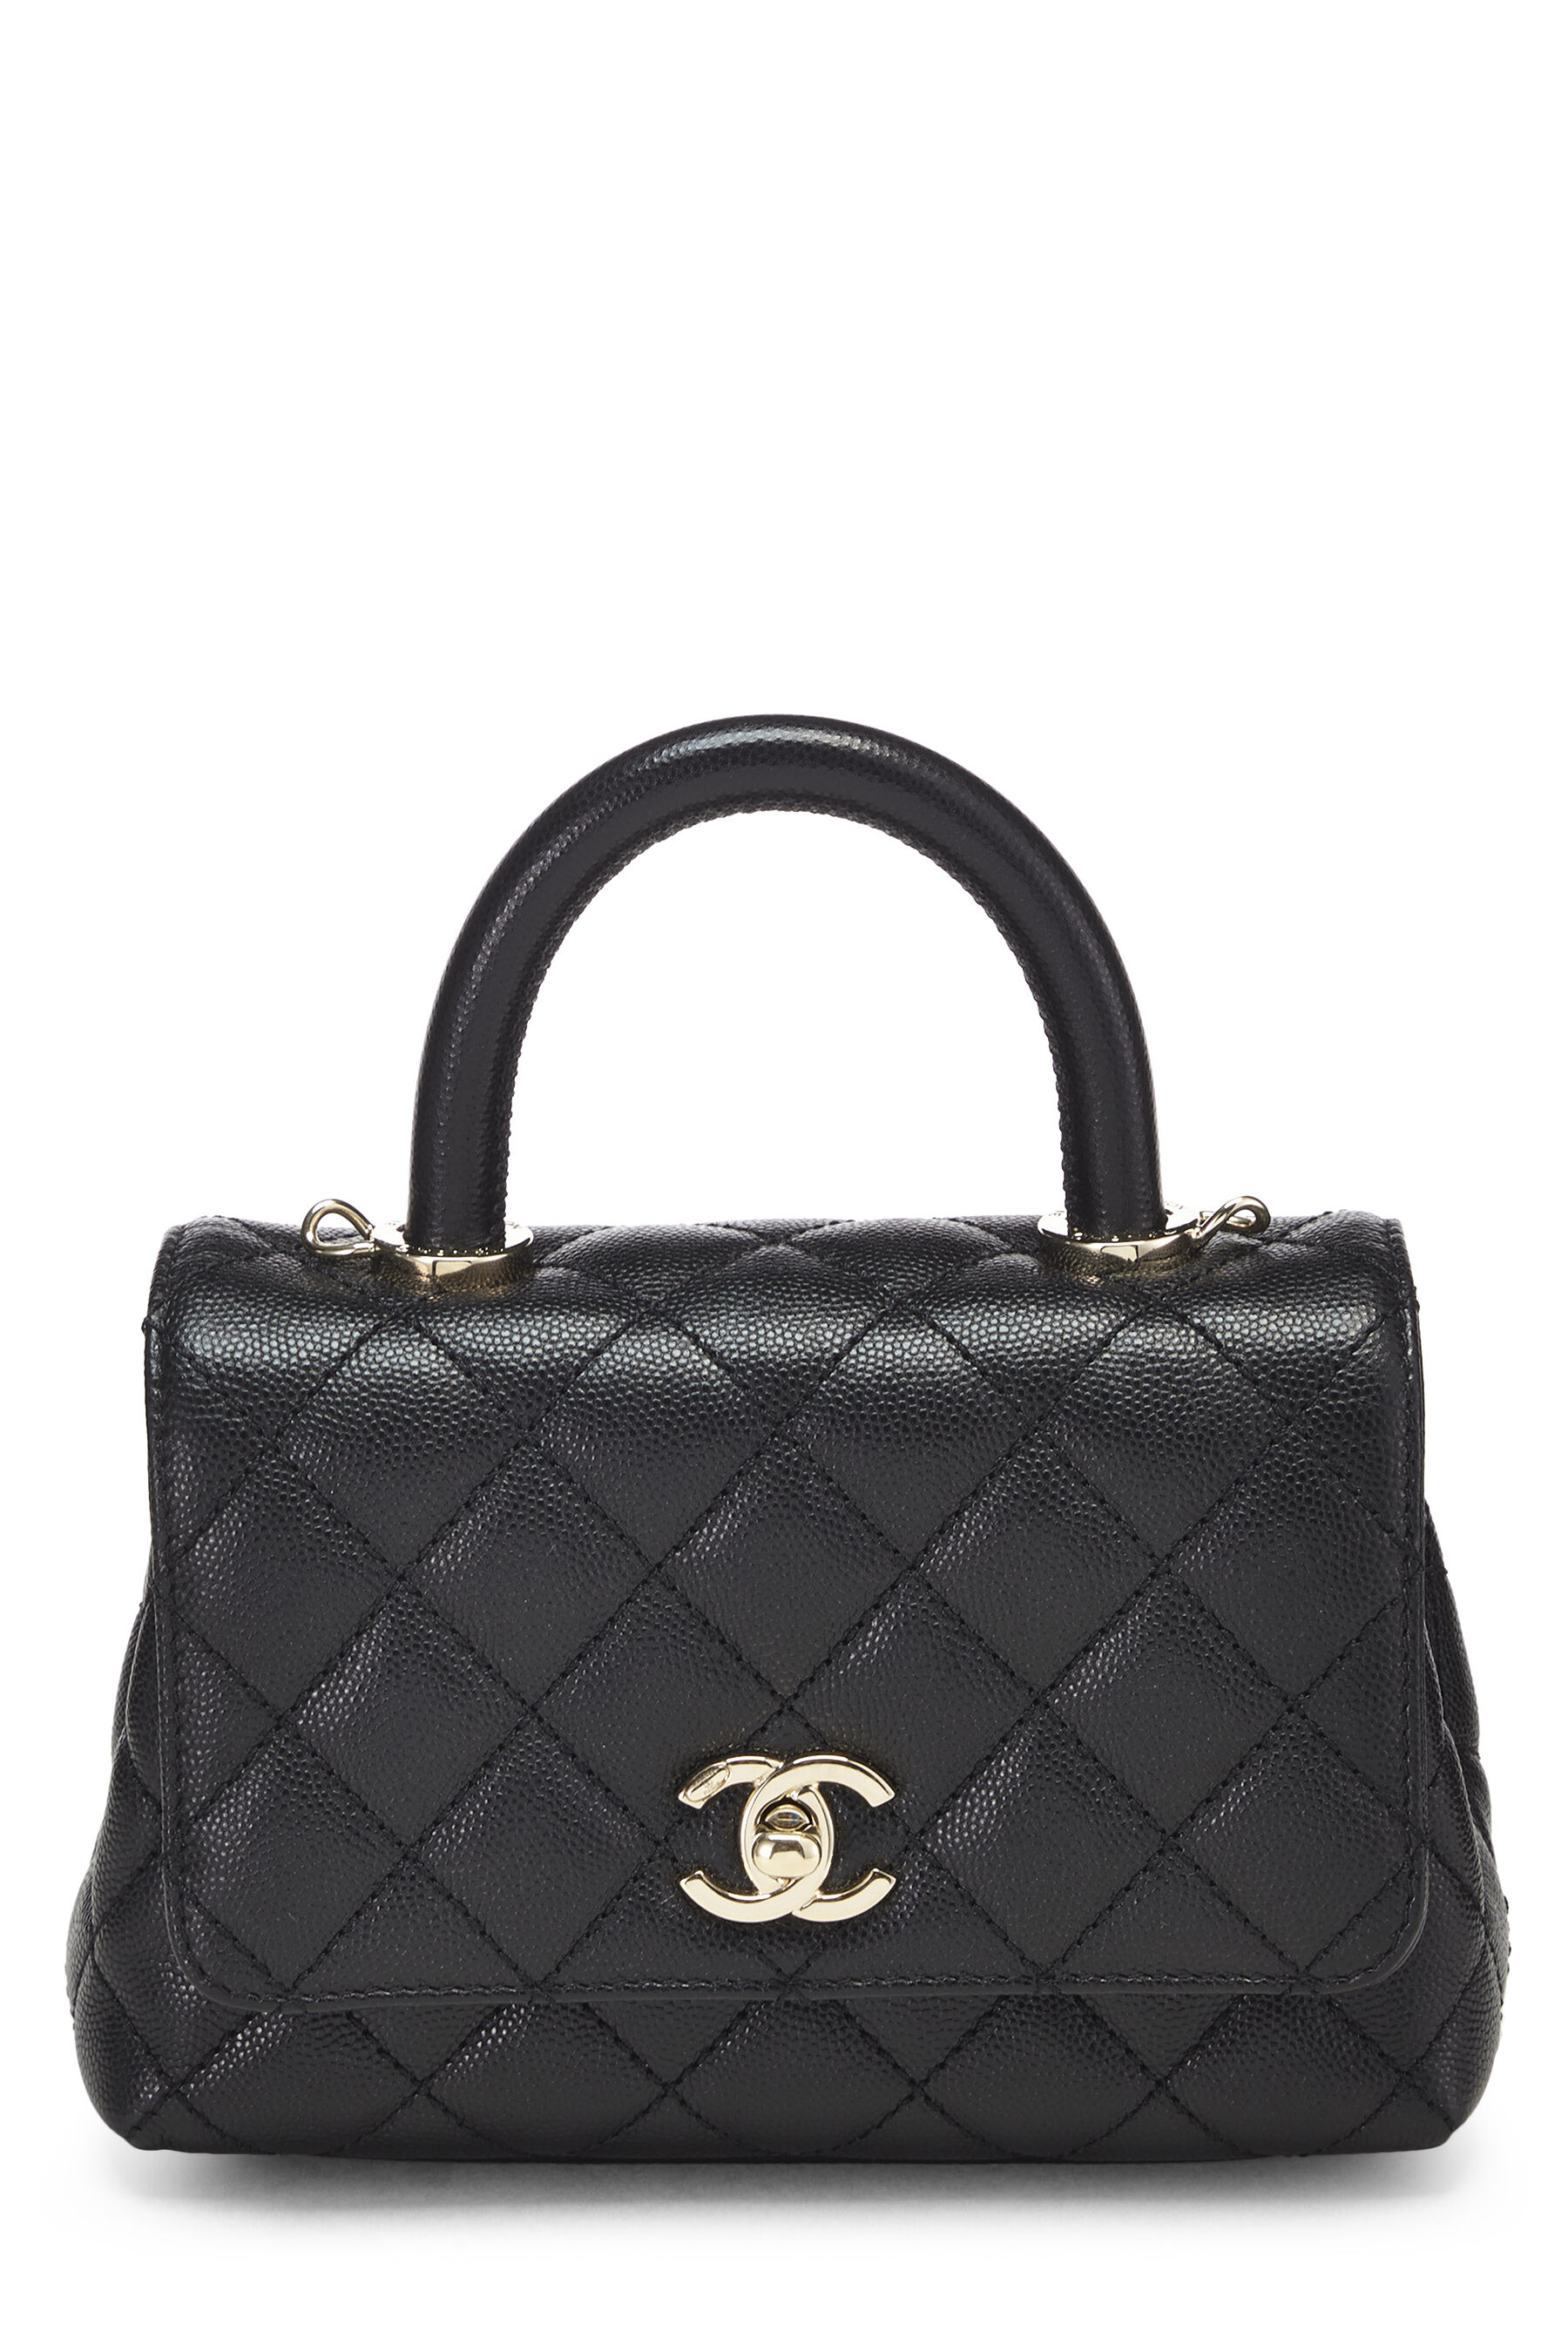 Chanel - Black Quilted Caviar Coco Handle Bag Extra Mini